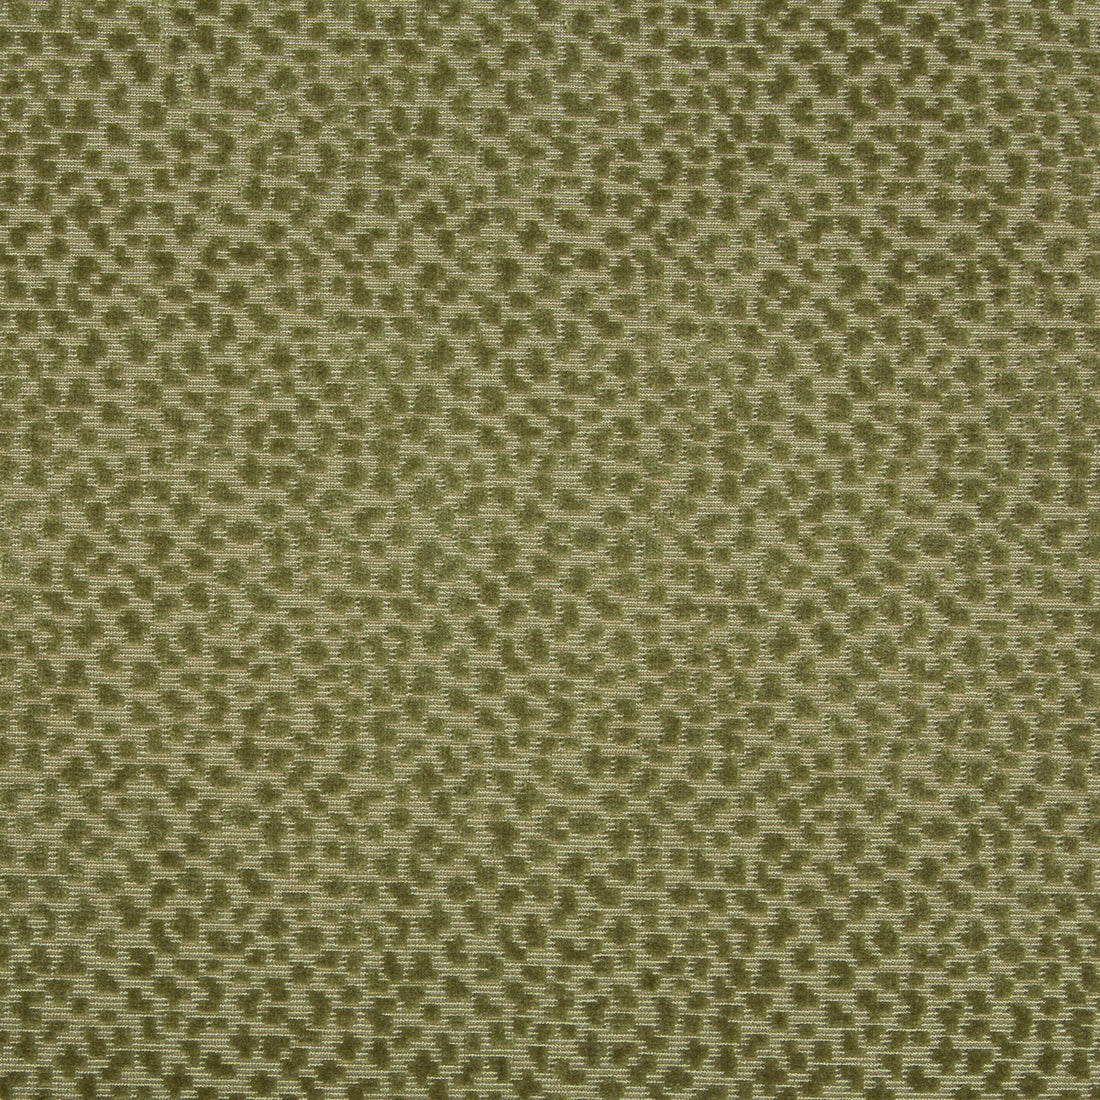 La Panthere Velvet fabric in moss color - pattern 8017126.3.0 - by Brunschwig &amp; Fils in the Les Ensembliers collection